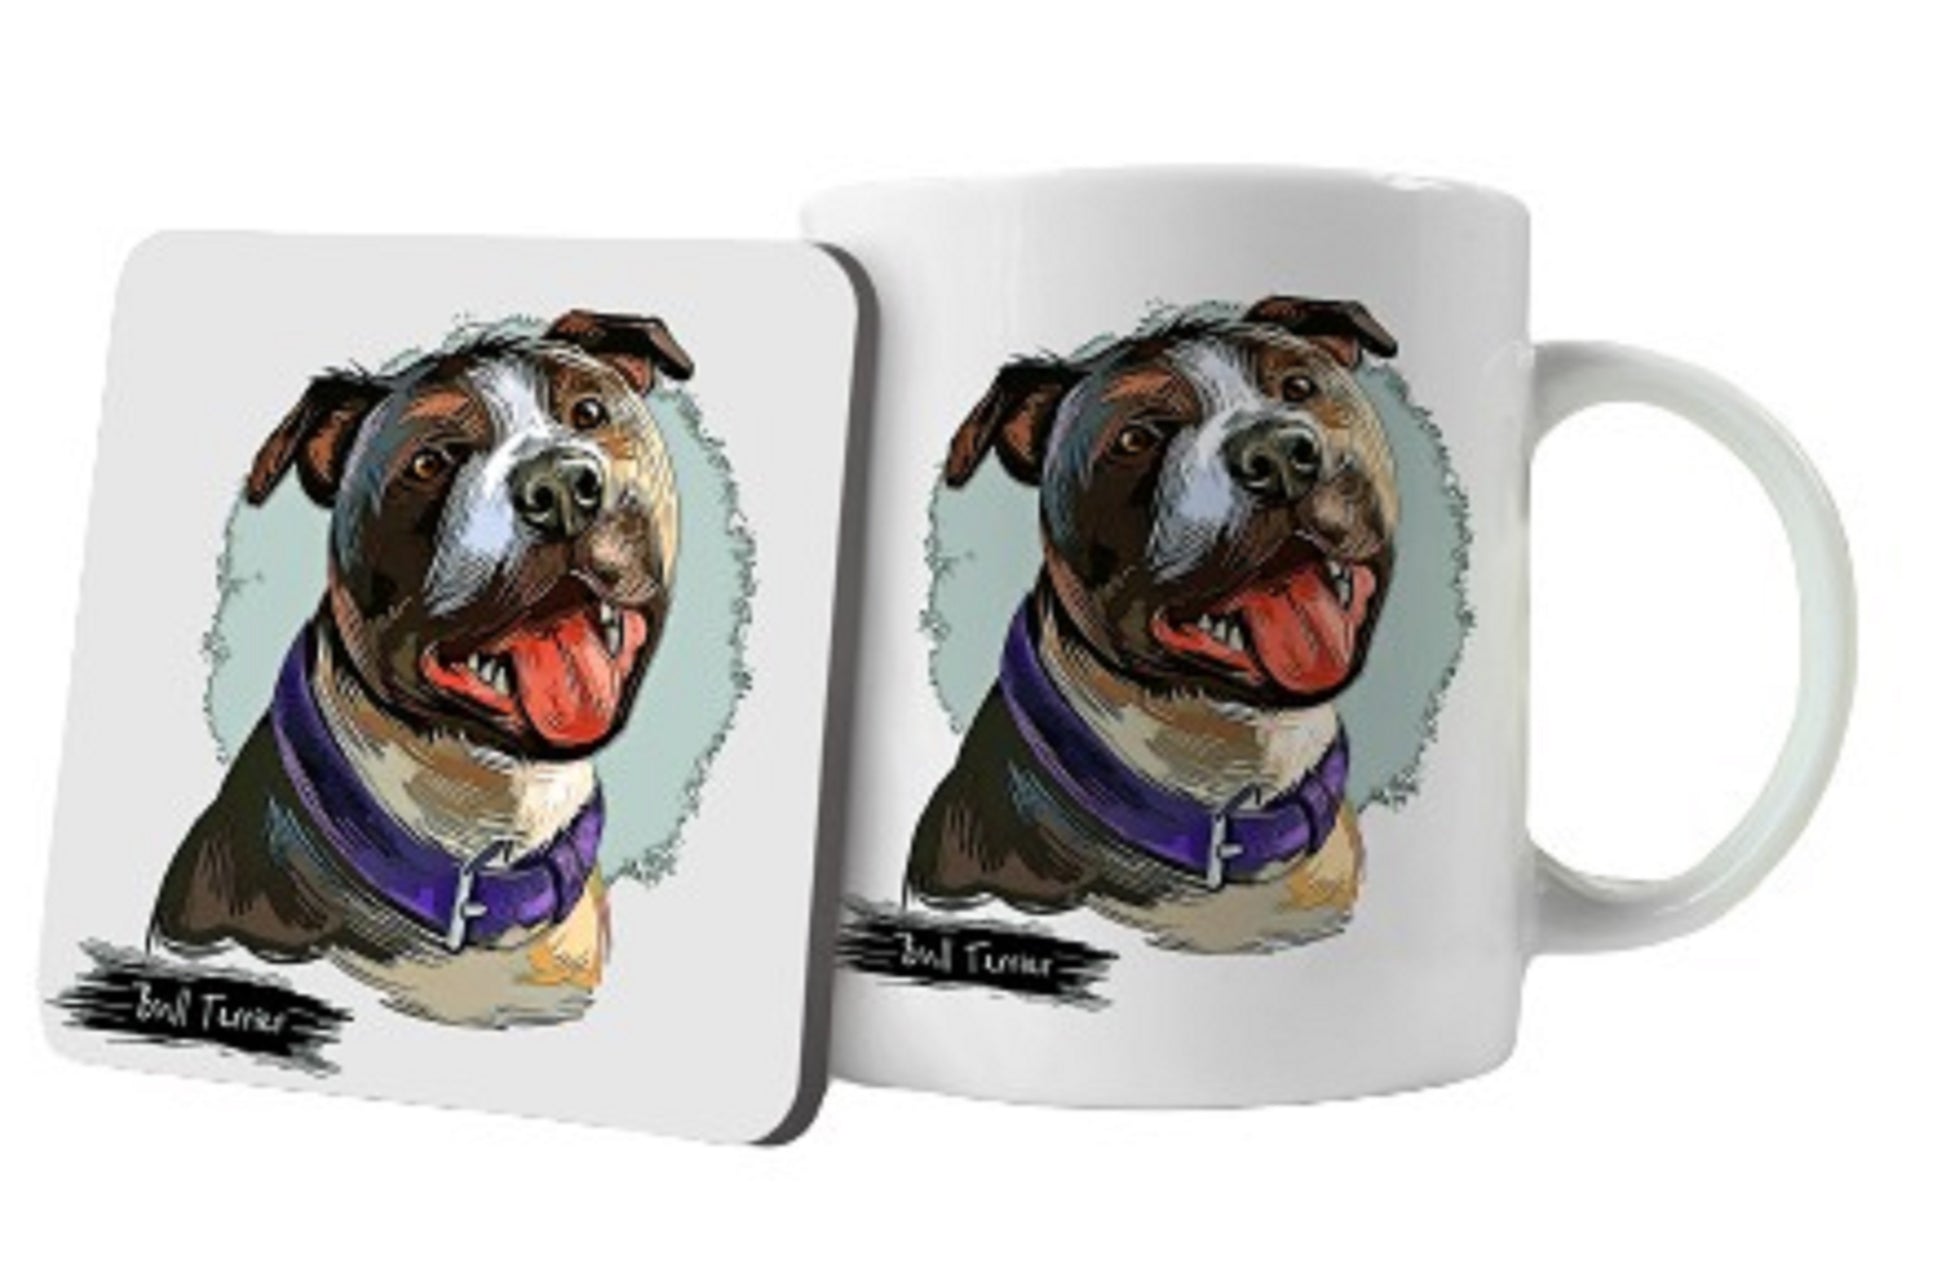 15oz Mug and Coaster Staffy Dog Head Mug and Coaster by Free Spirit Accessories sold by Free Spirit Accessories